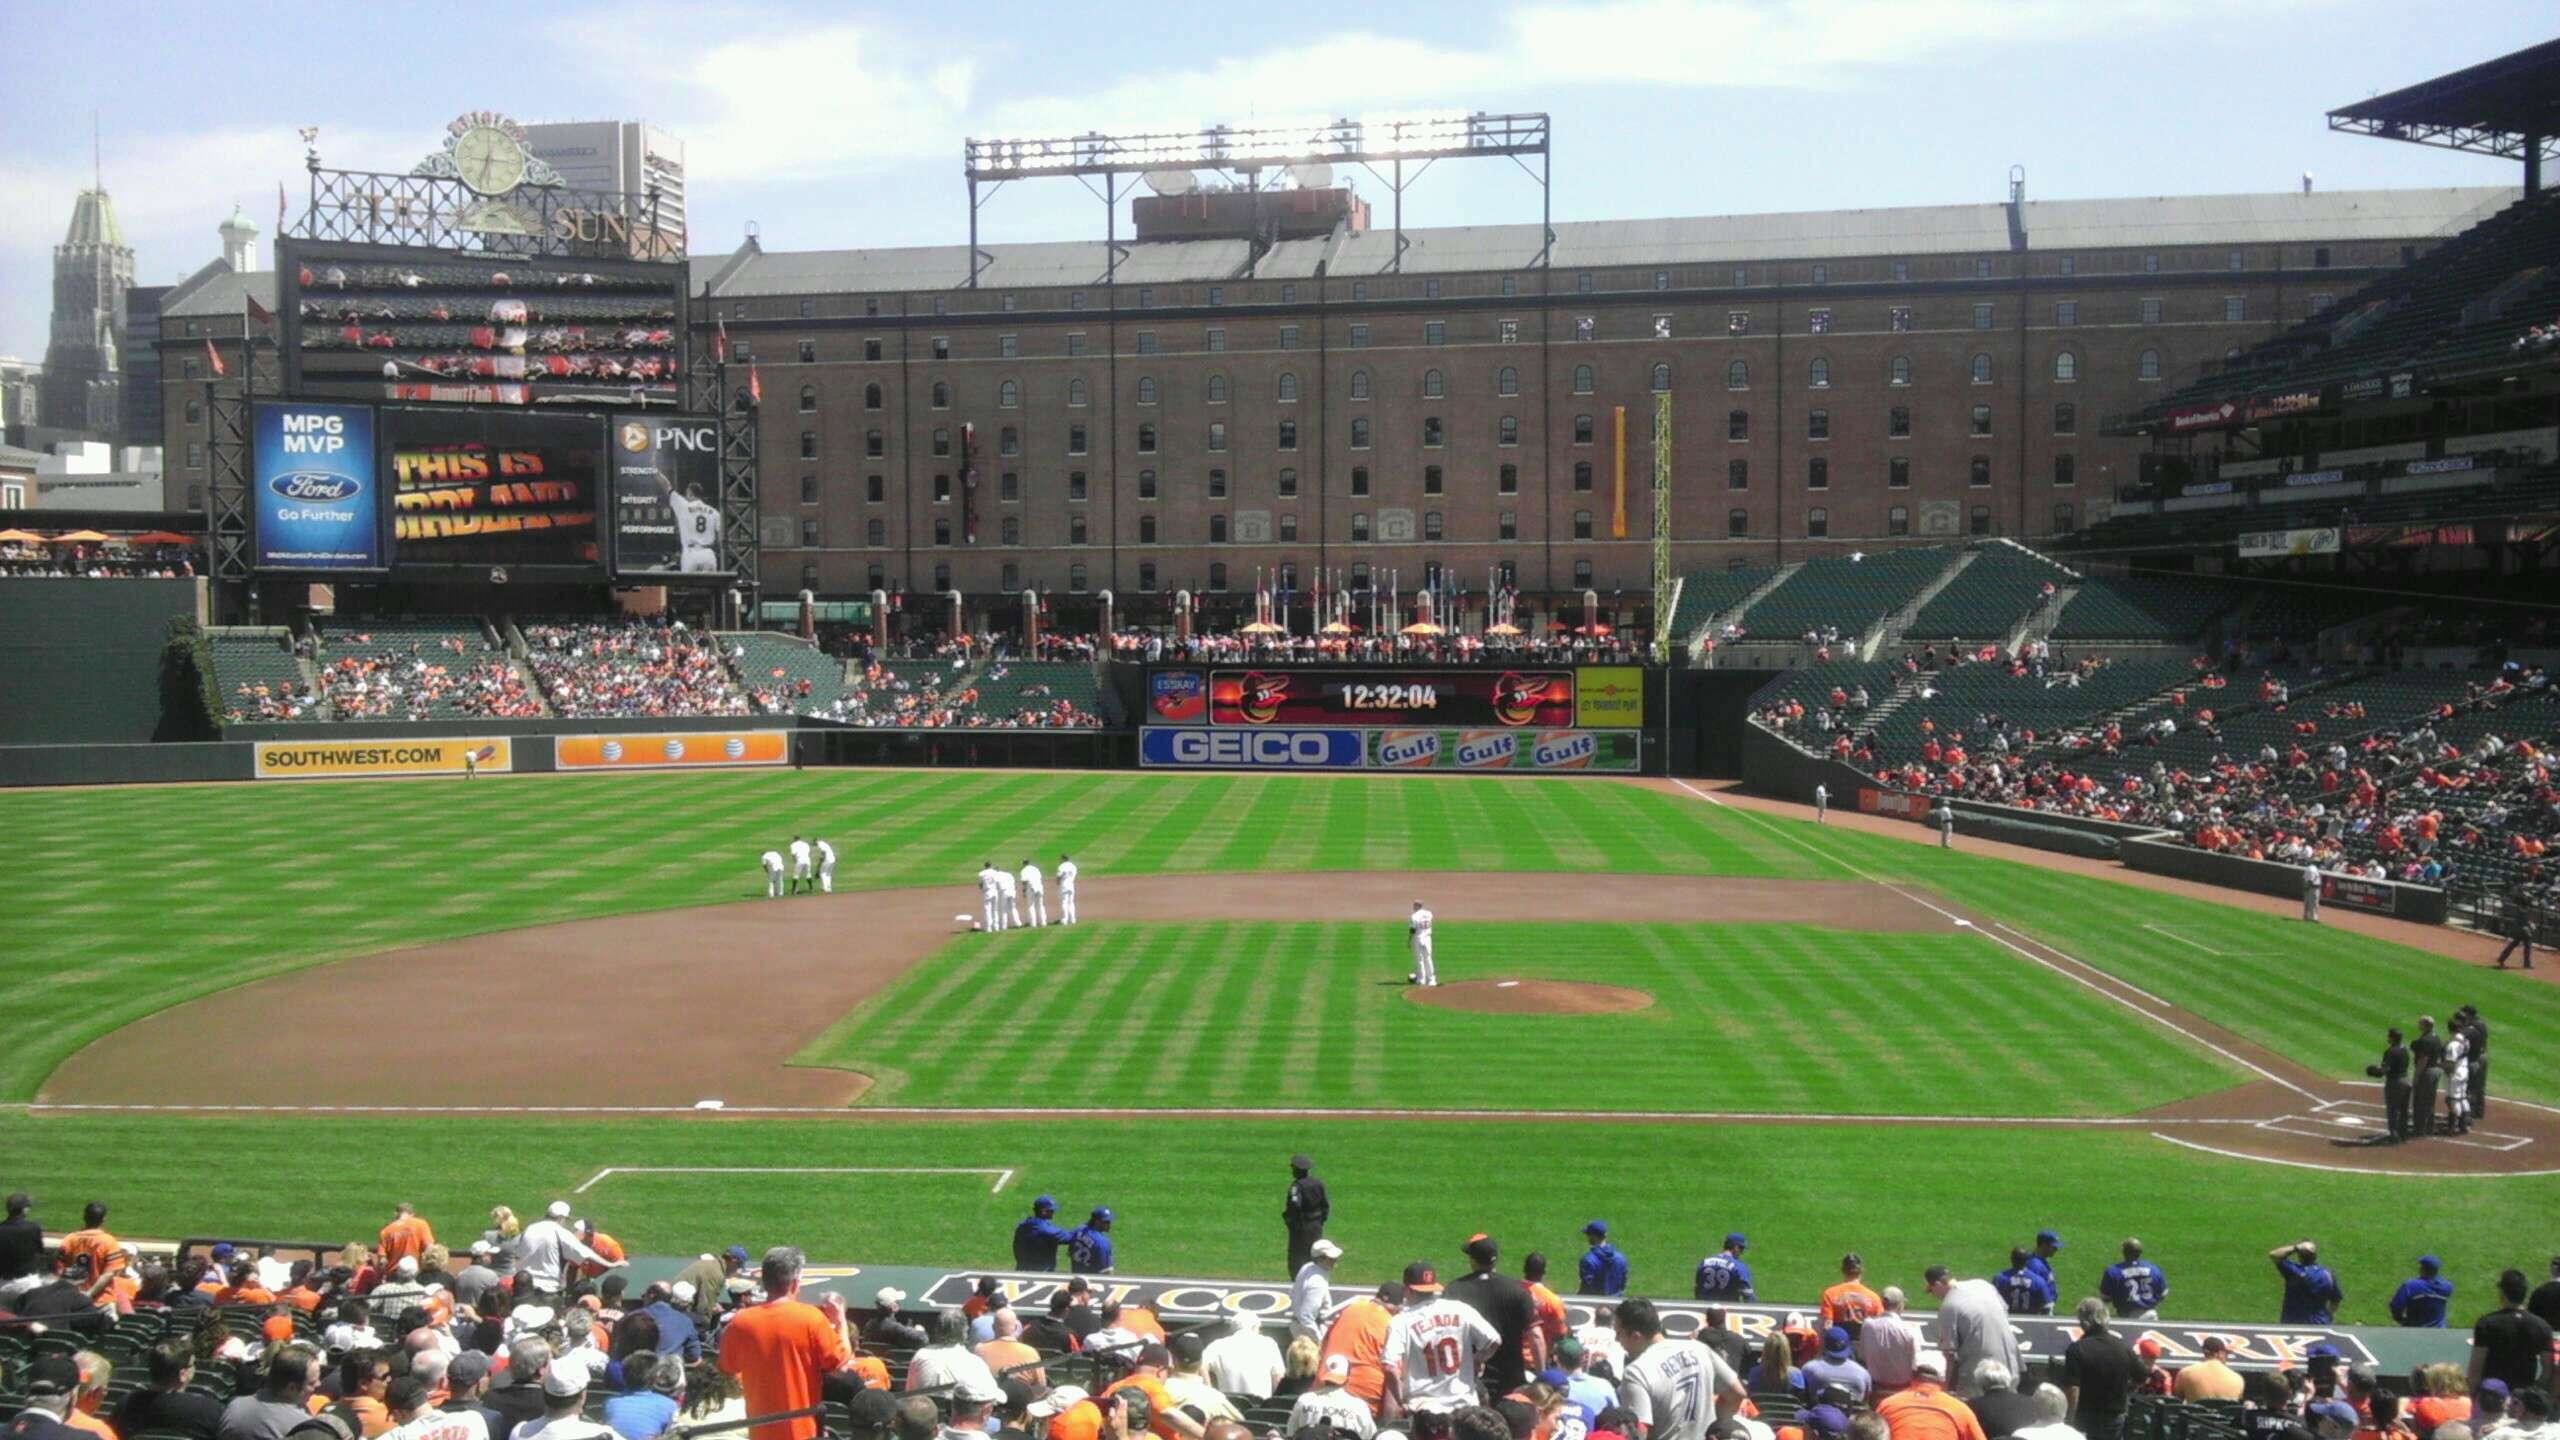 2560x1440 Oriole Park at Camden Yards Section 49, Row 1, Seat 8